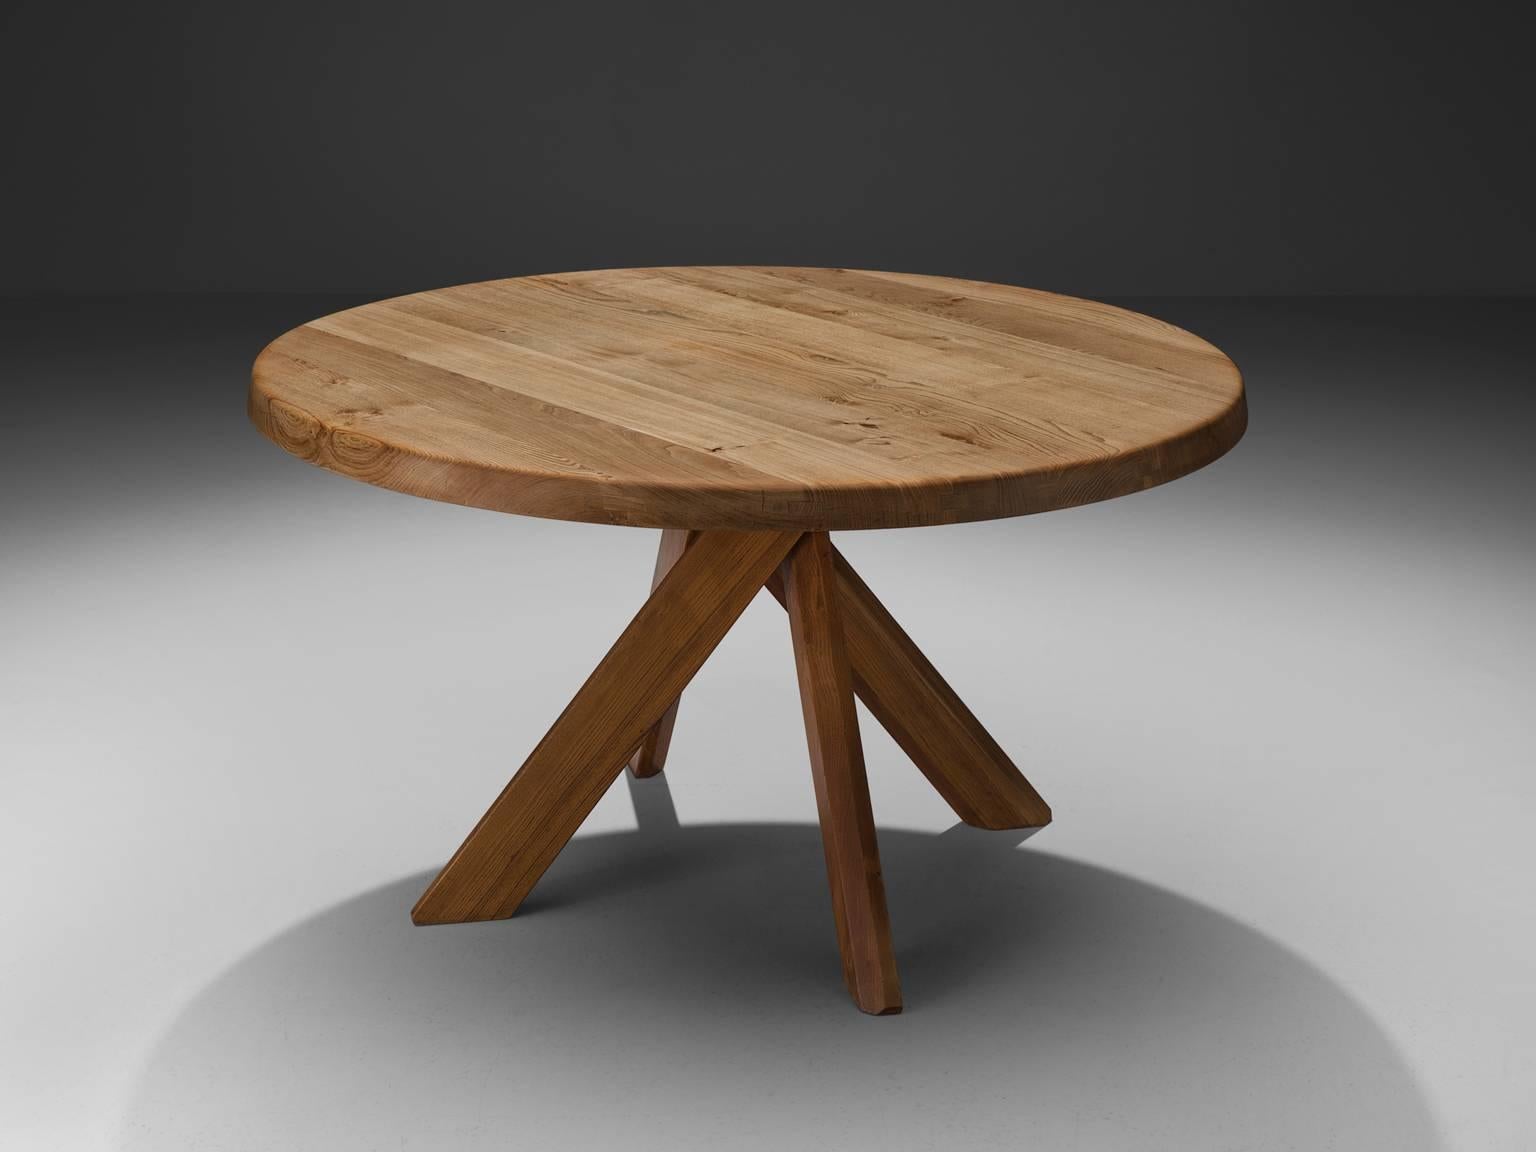 Pierre Chapo, round T21C dining table, elm, France, ca. 1973.

The basic design and constructions, as well as the use of solid Elmwood characterizes the work of Chapo. The interesting base of the table is build with 5 stems, with angled edges to